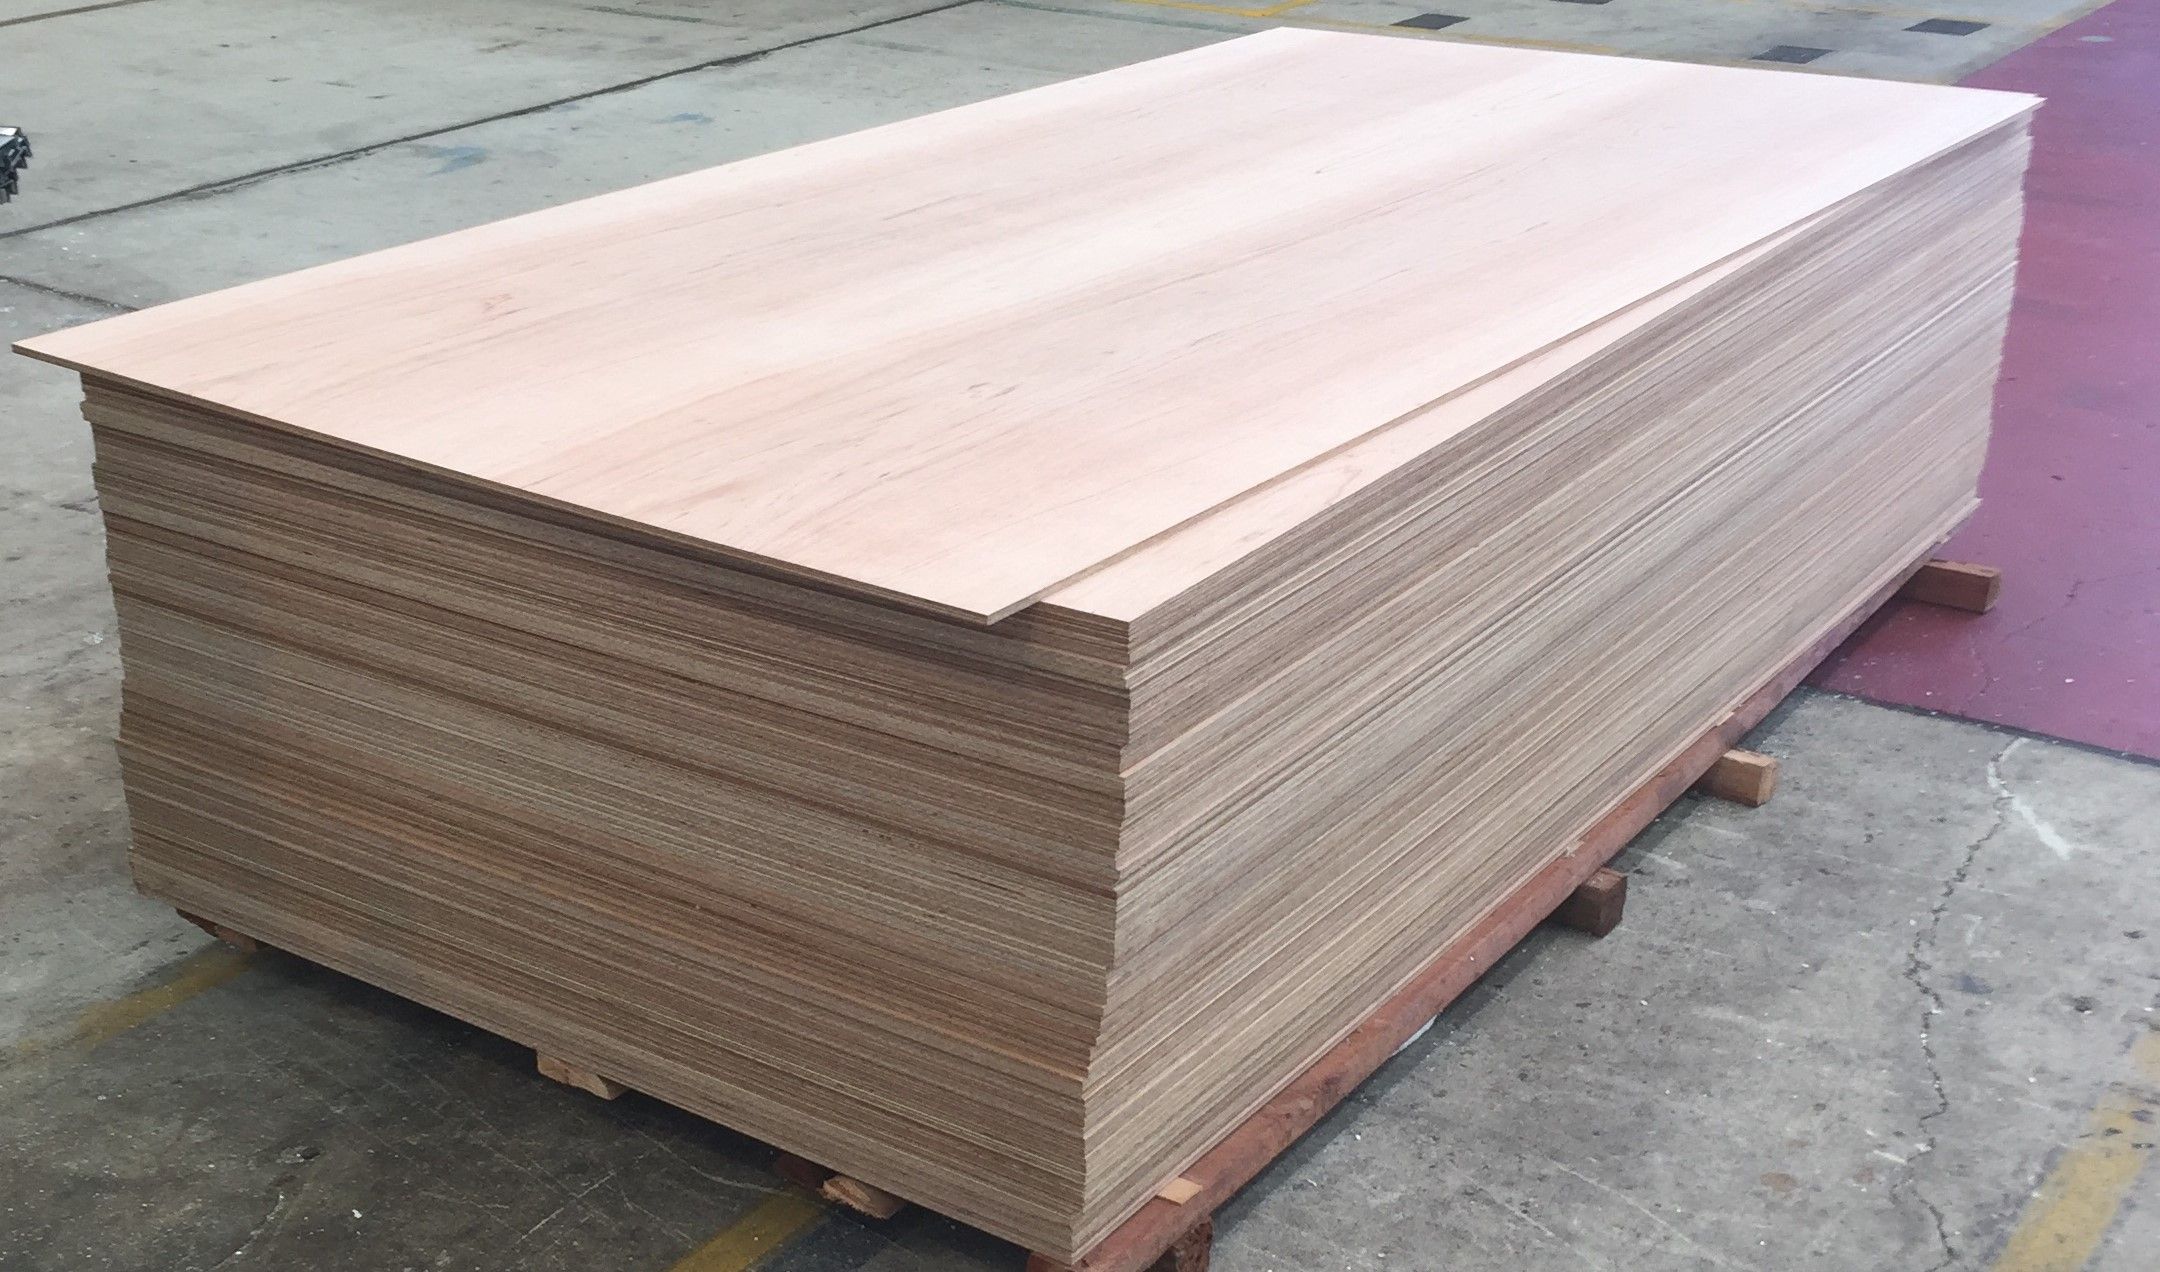 Commercial plywood, plywood brisbane, plywood flooring,  Non-Structural CD Plywood, Structural Plywood, Exterior Hardwood Plywood, Polyester Faced Plywood, and Film Faced Non-Structural Plywood.